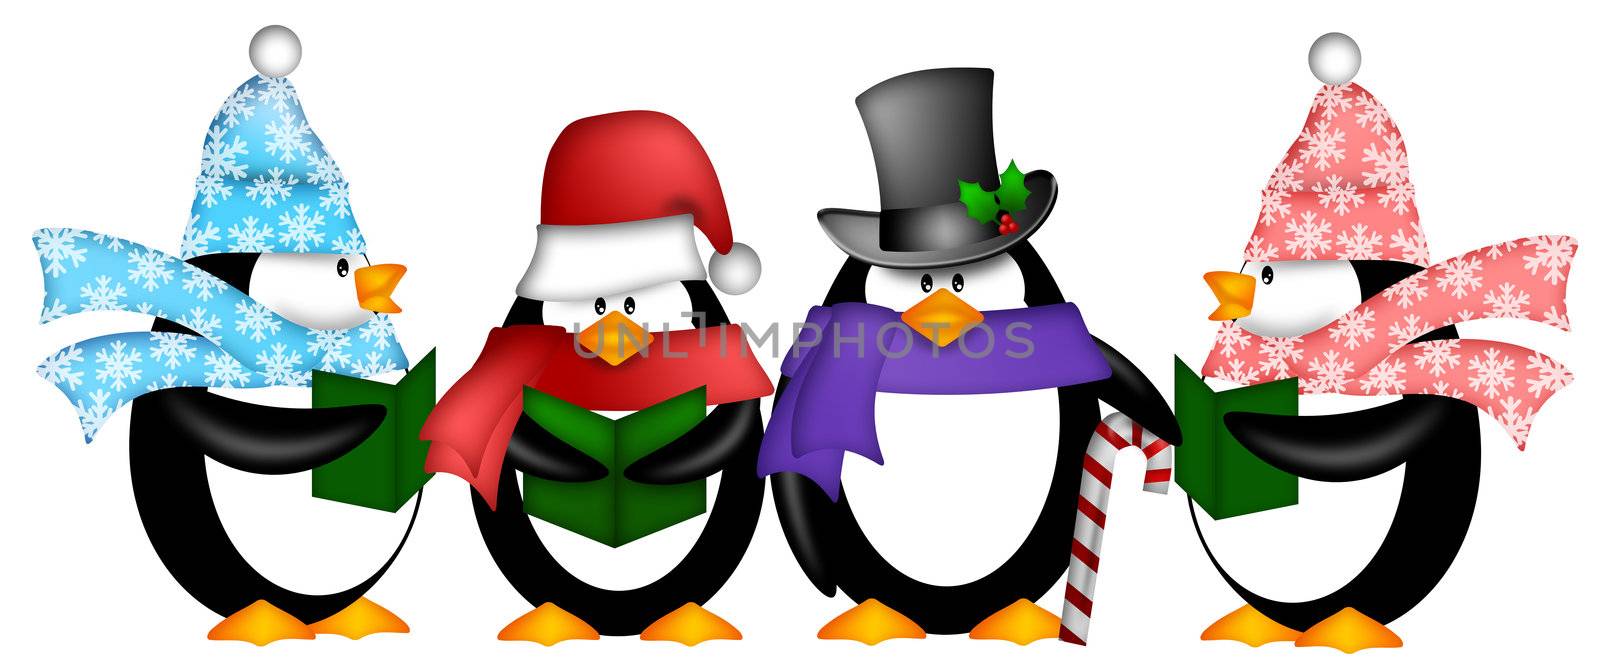 Cute Penguins Singing Carol Christmas Songs with Scarf and Hat Cartoon Illustration